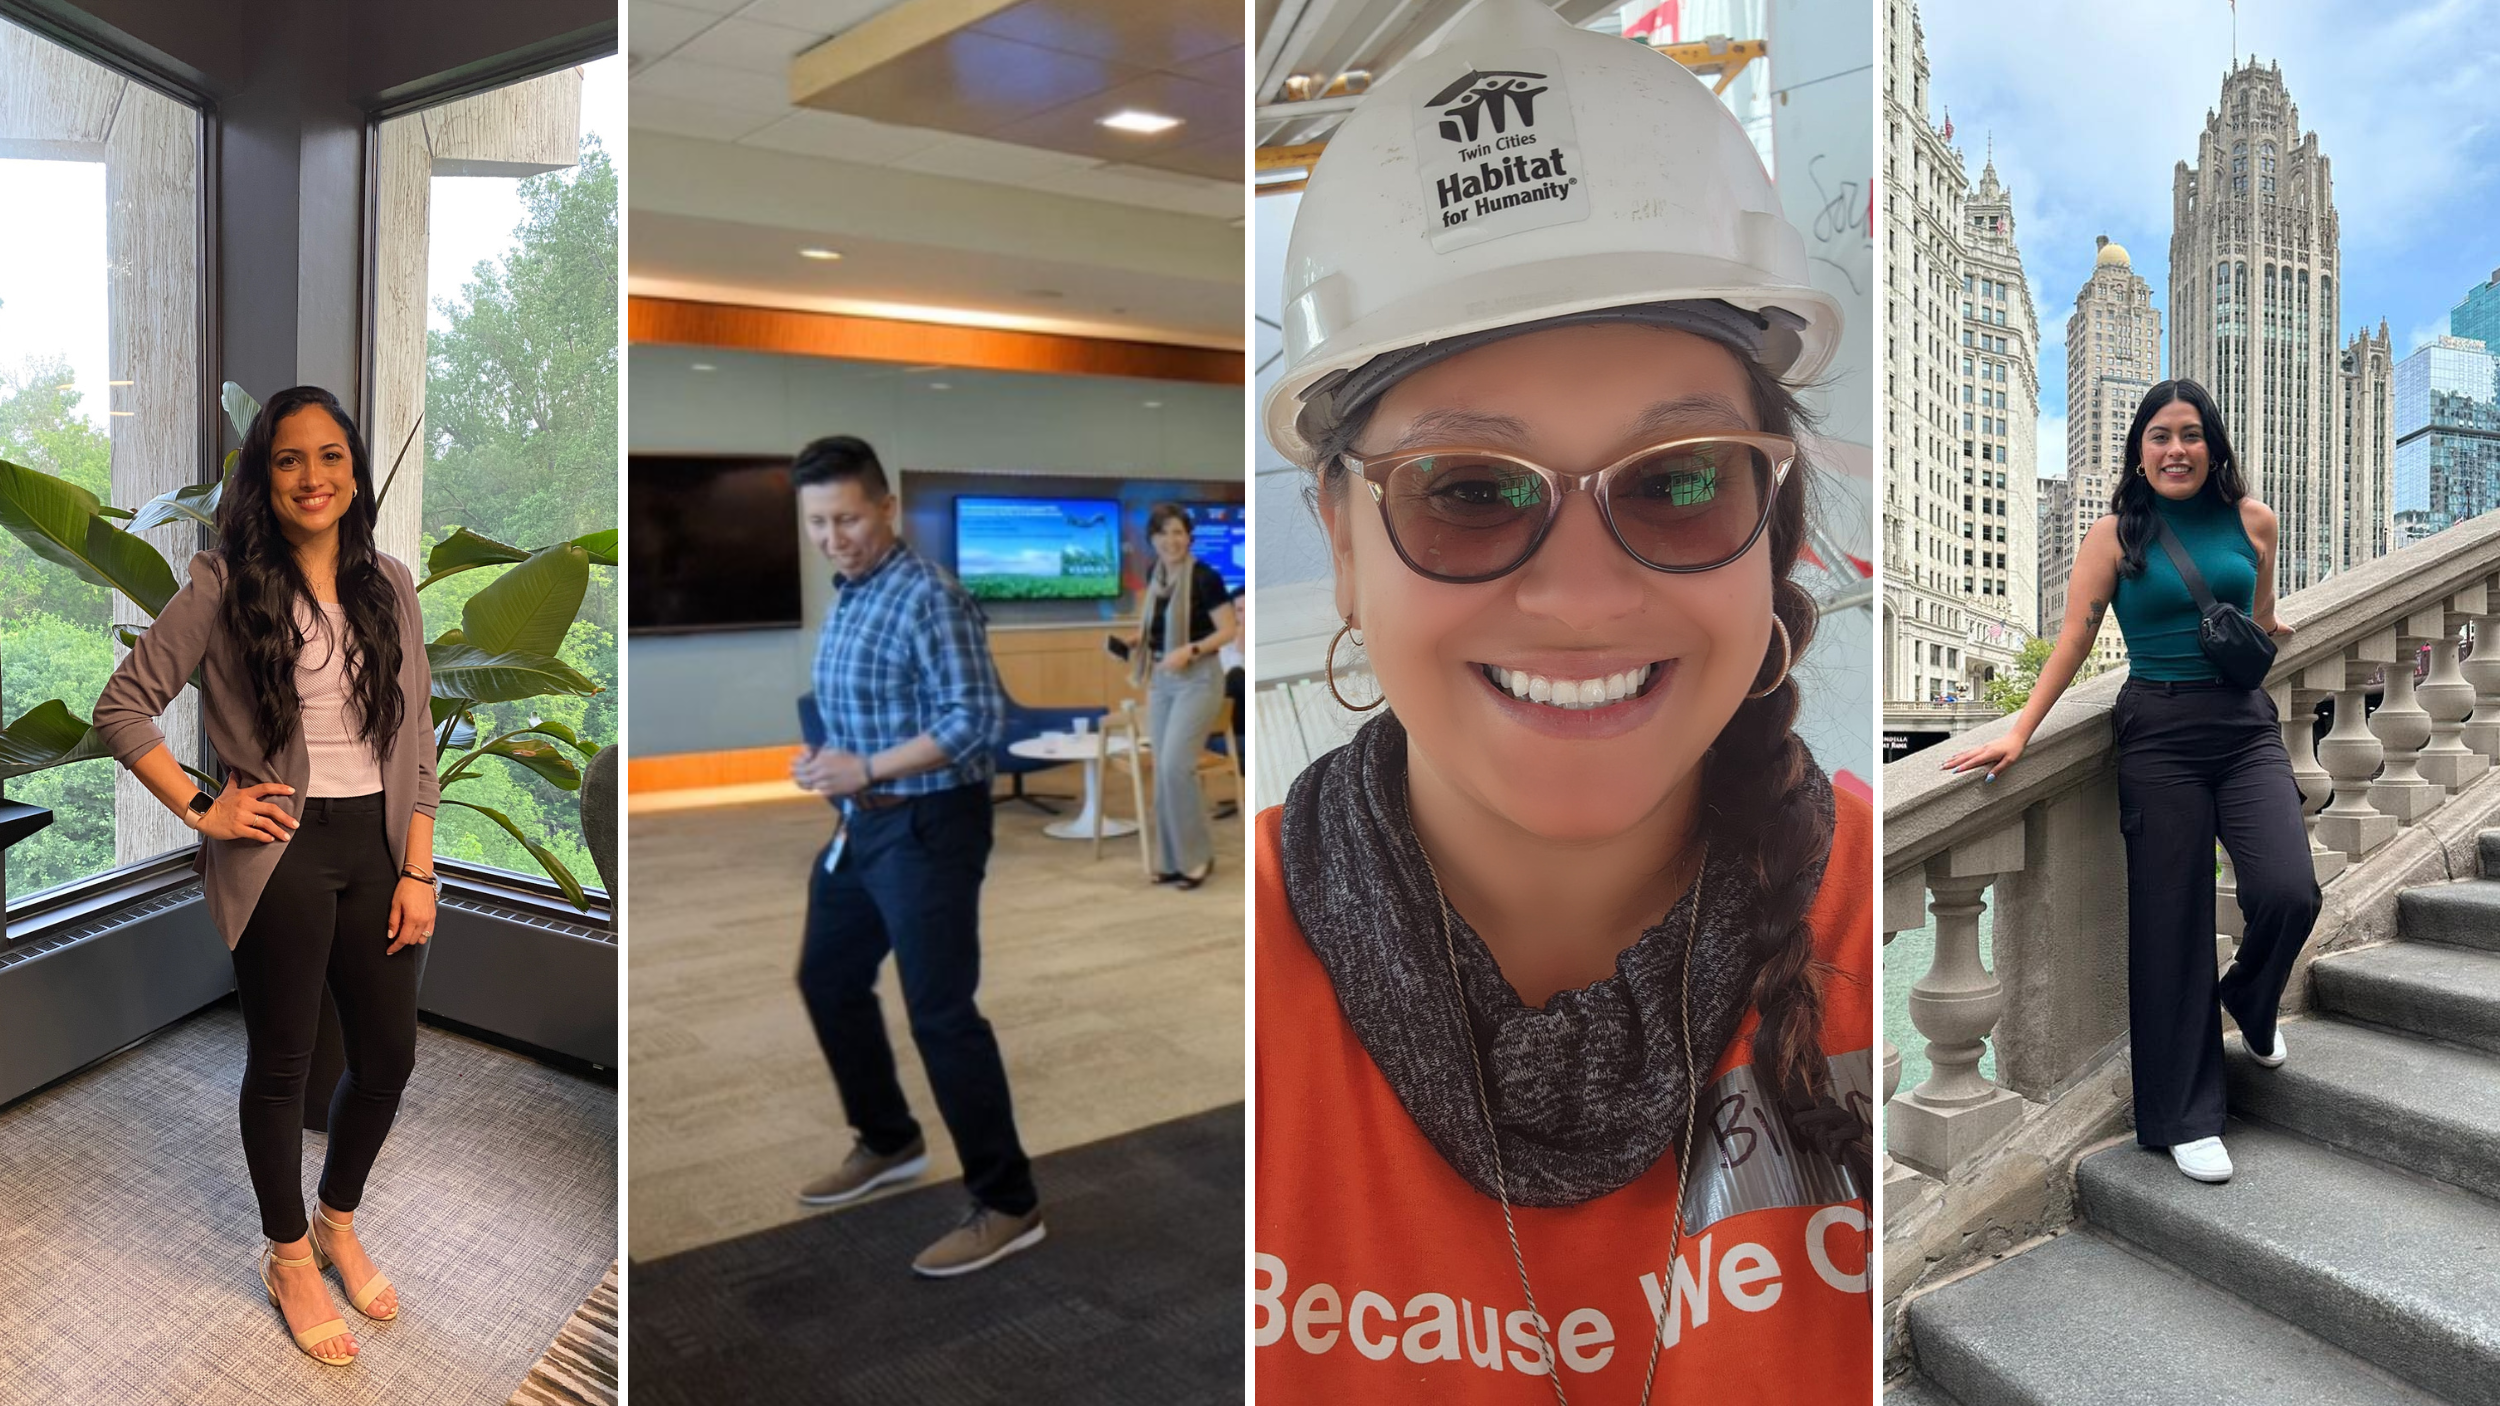 Sofia standing on a staircase in front of a background of tall buildings, wearing dark pants and a green shirt. Teammates in our Minneapolis office learn to salsa dance together. Andrea standing in front of a window and a plant, smiling, and wearing dark pants and a suit jacket. Bianca smiling and taking a selfie while wearing sunglasses and a construction hat.